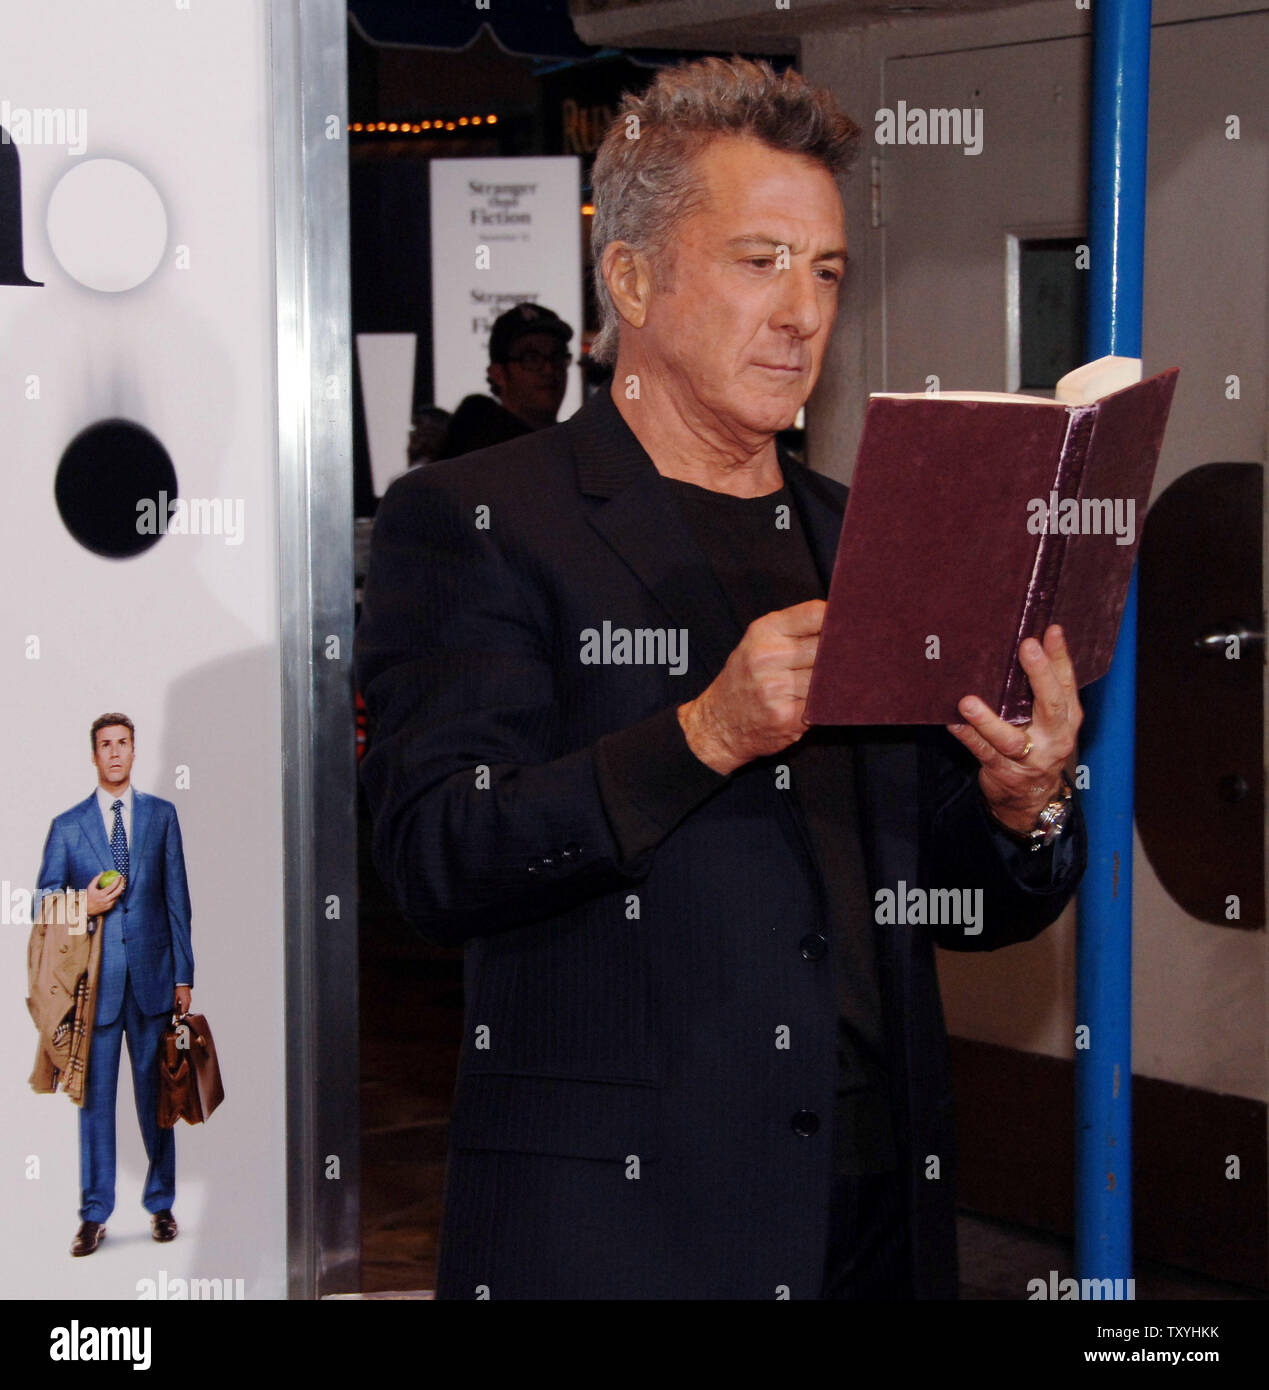 Actor Dustin Hoffman A Cast Member In The Motion Picture Comedy